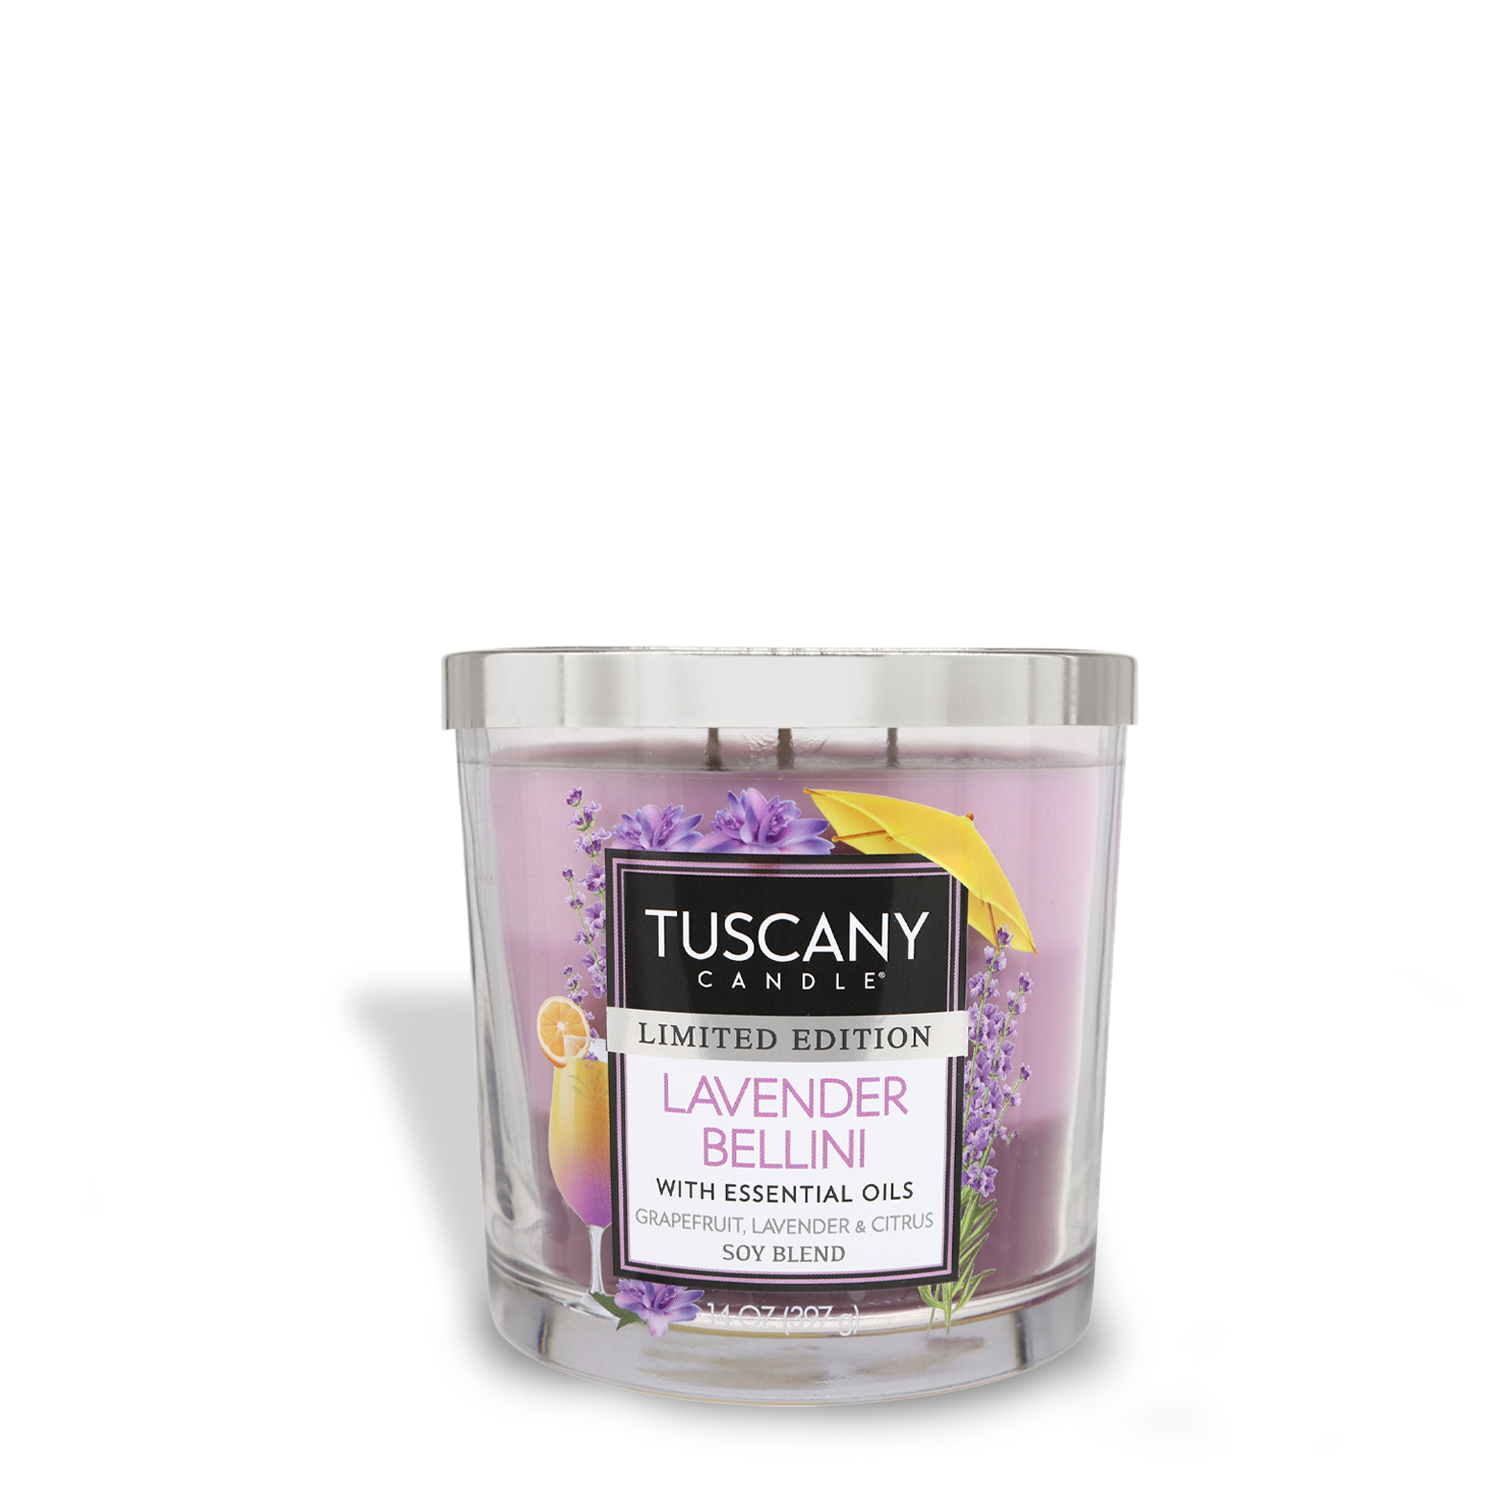 A Tuscany Candle® SEASONAL Lavender Bellini Long-Lasting Scented Jar Candle (14 oz) with essential oils.